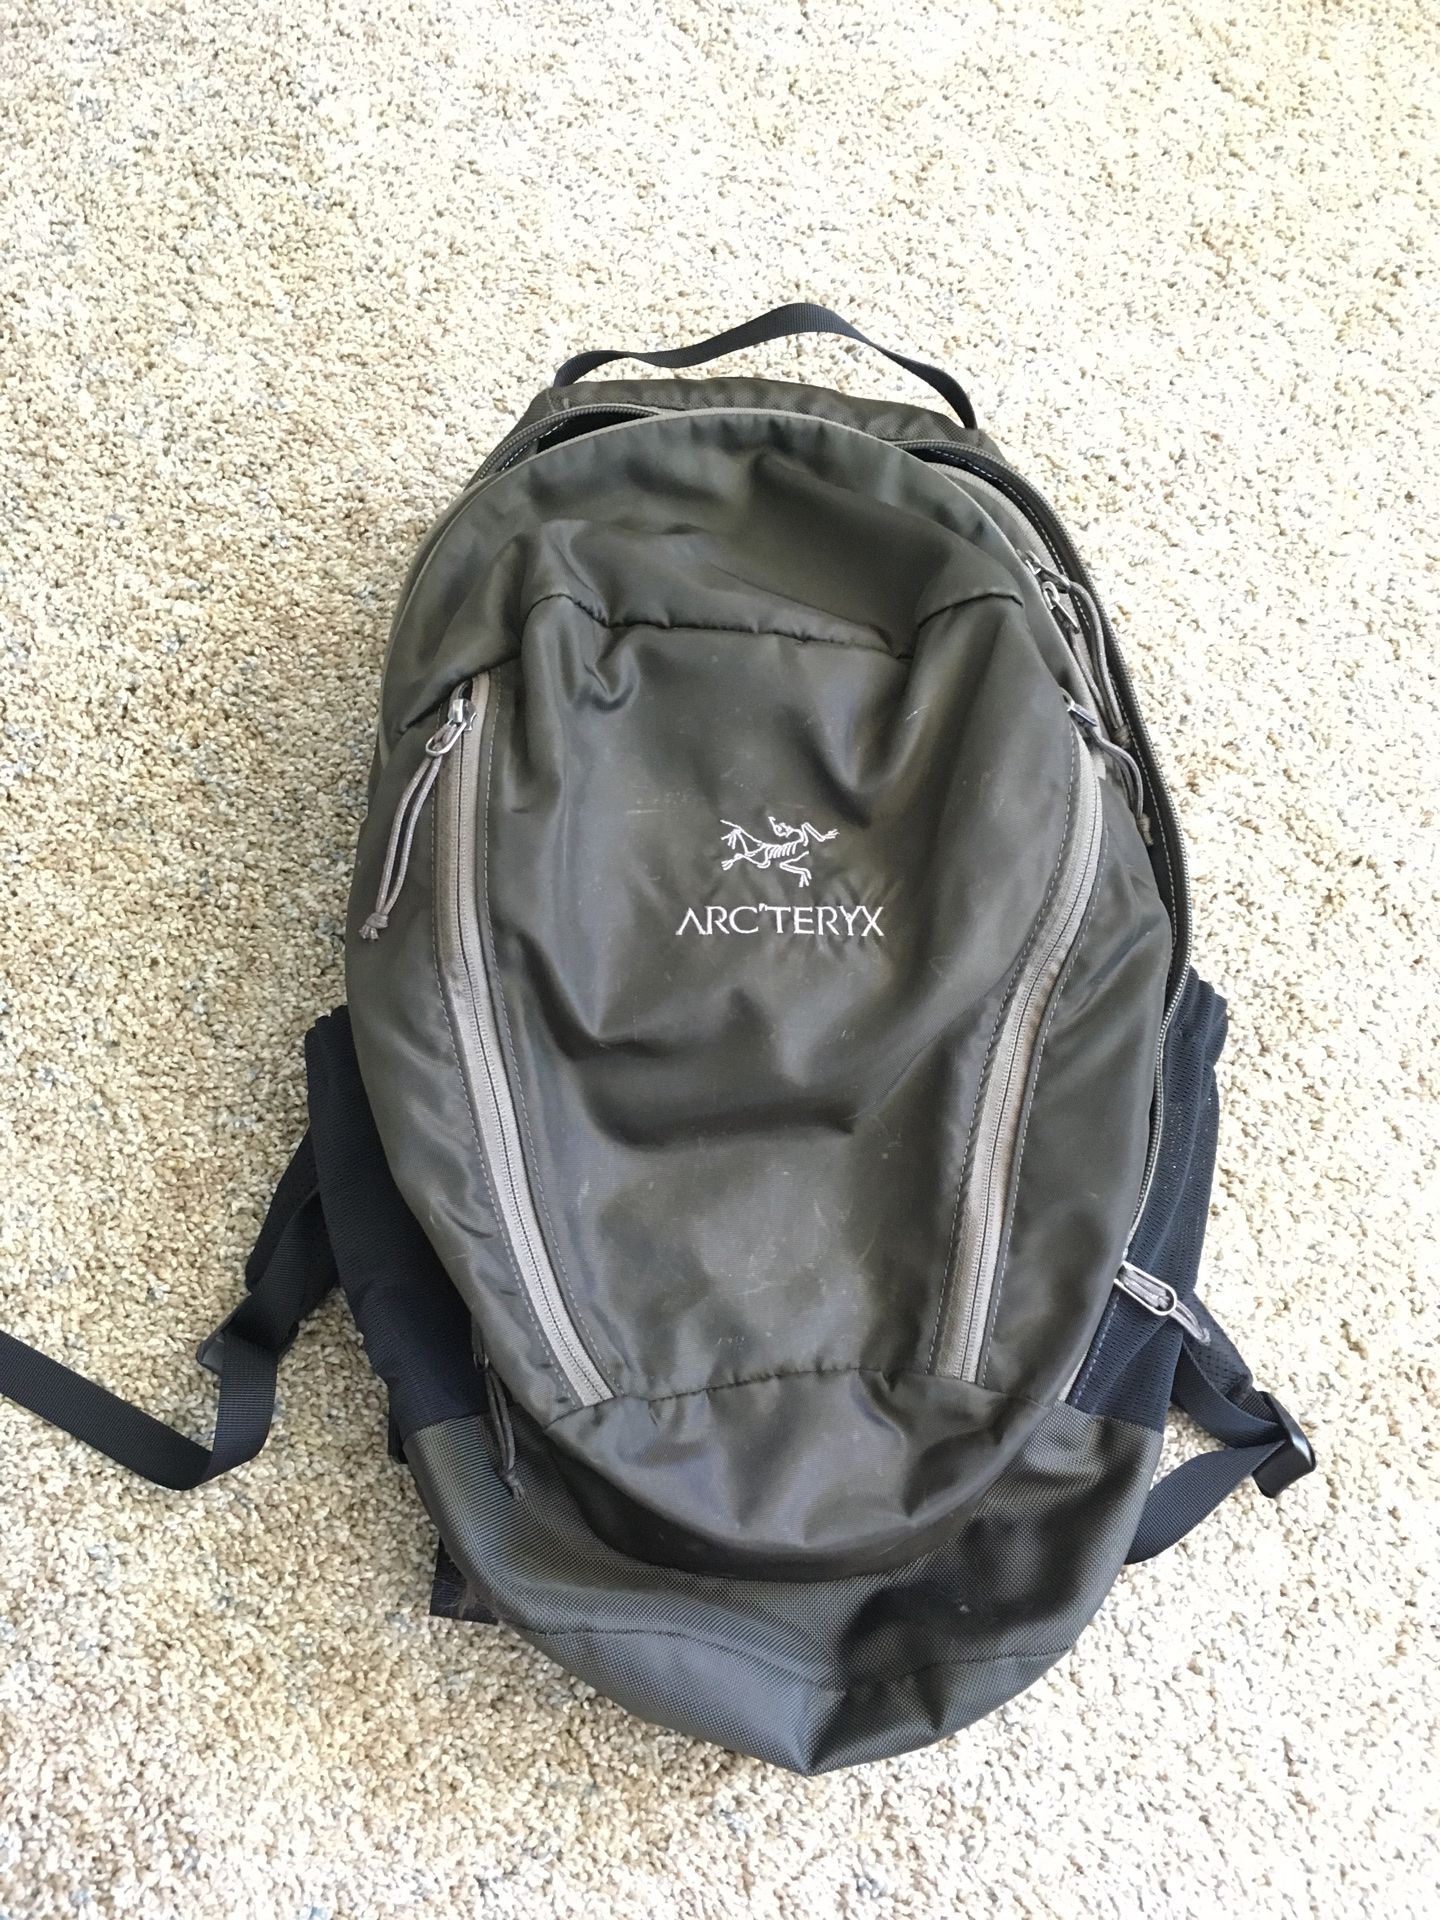 ARCTERYX Backpack (color is olive)